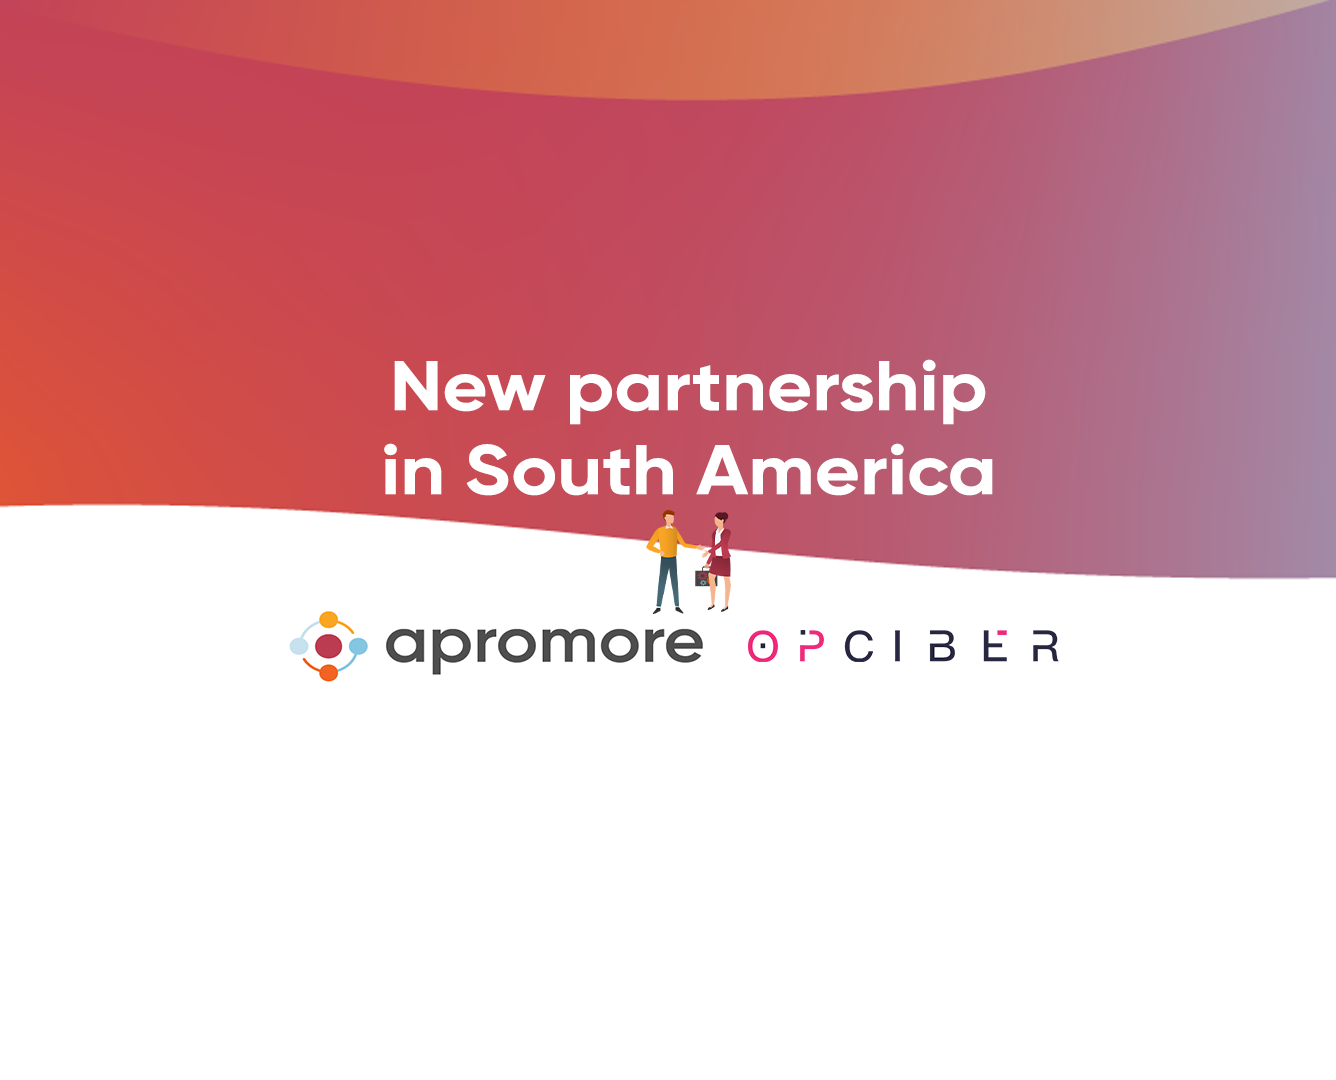 Apromore’s New Partnership in South America